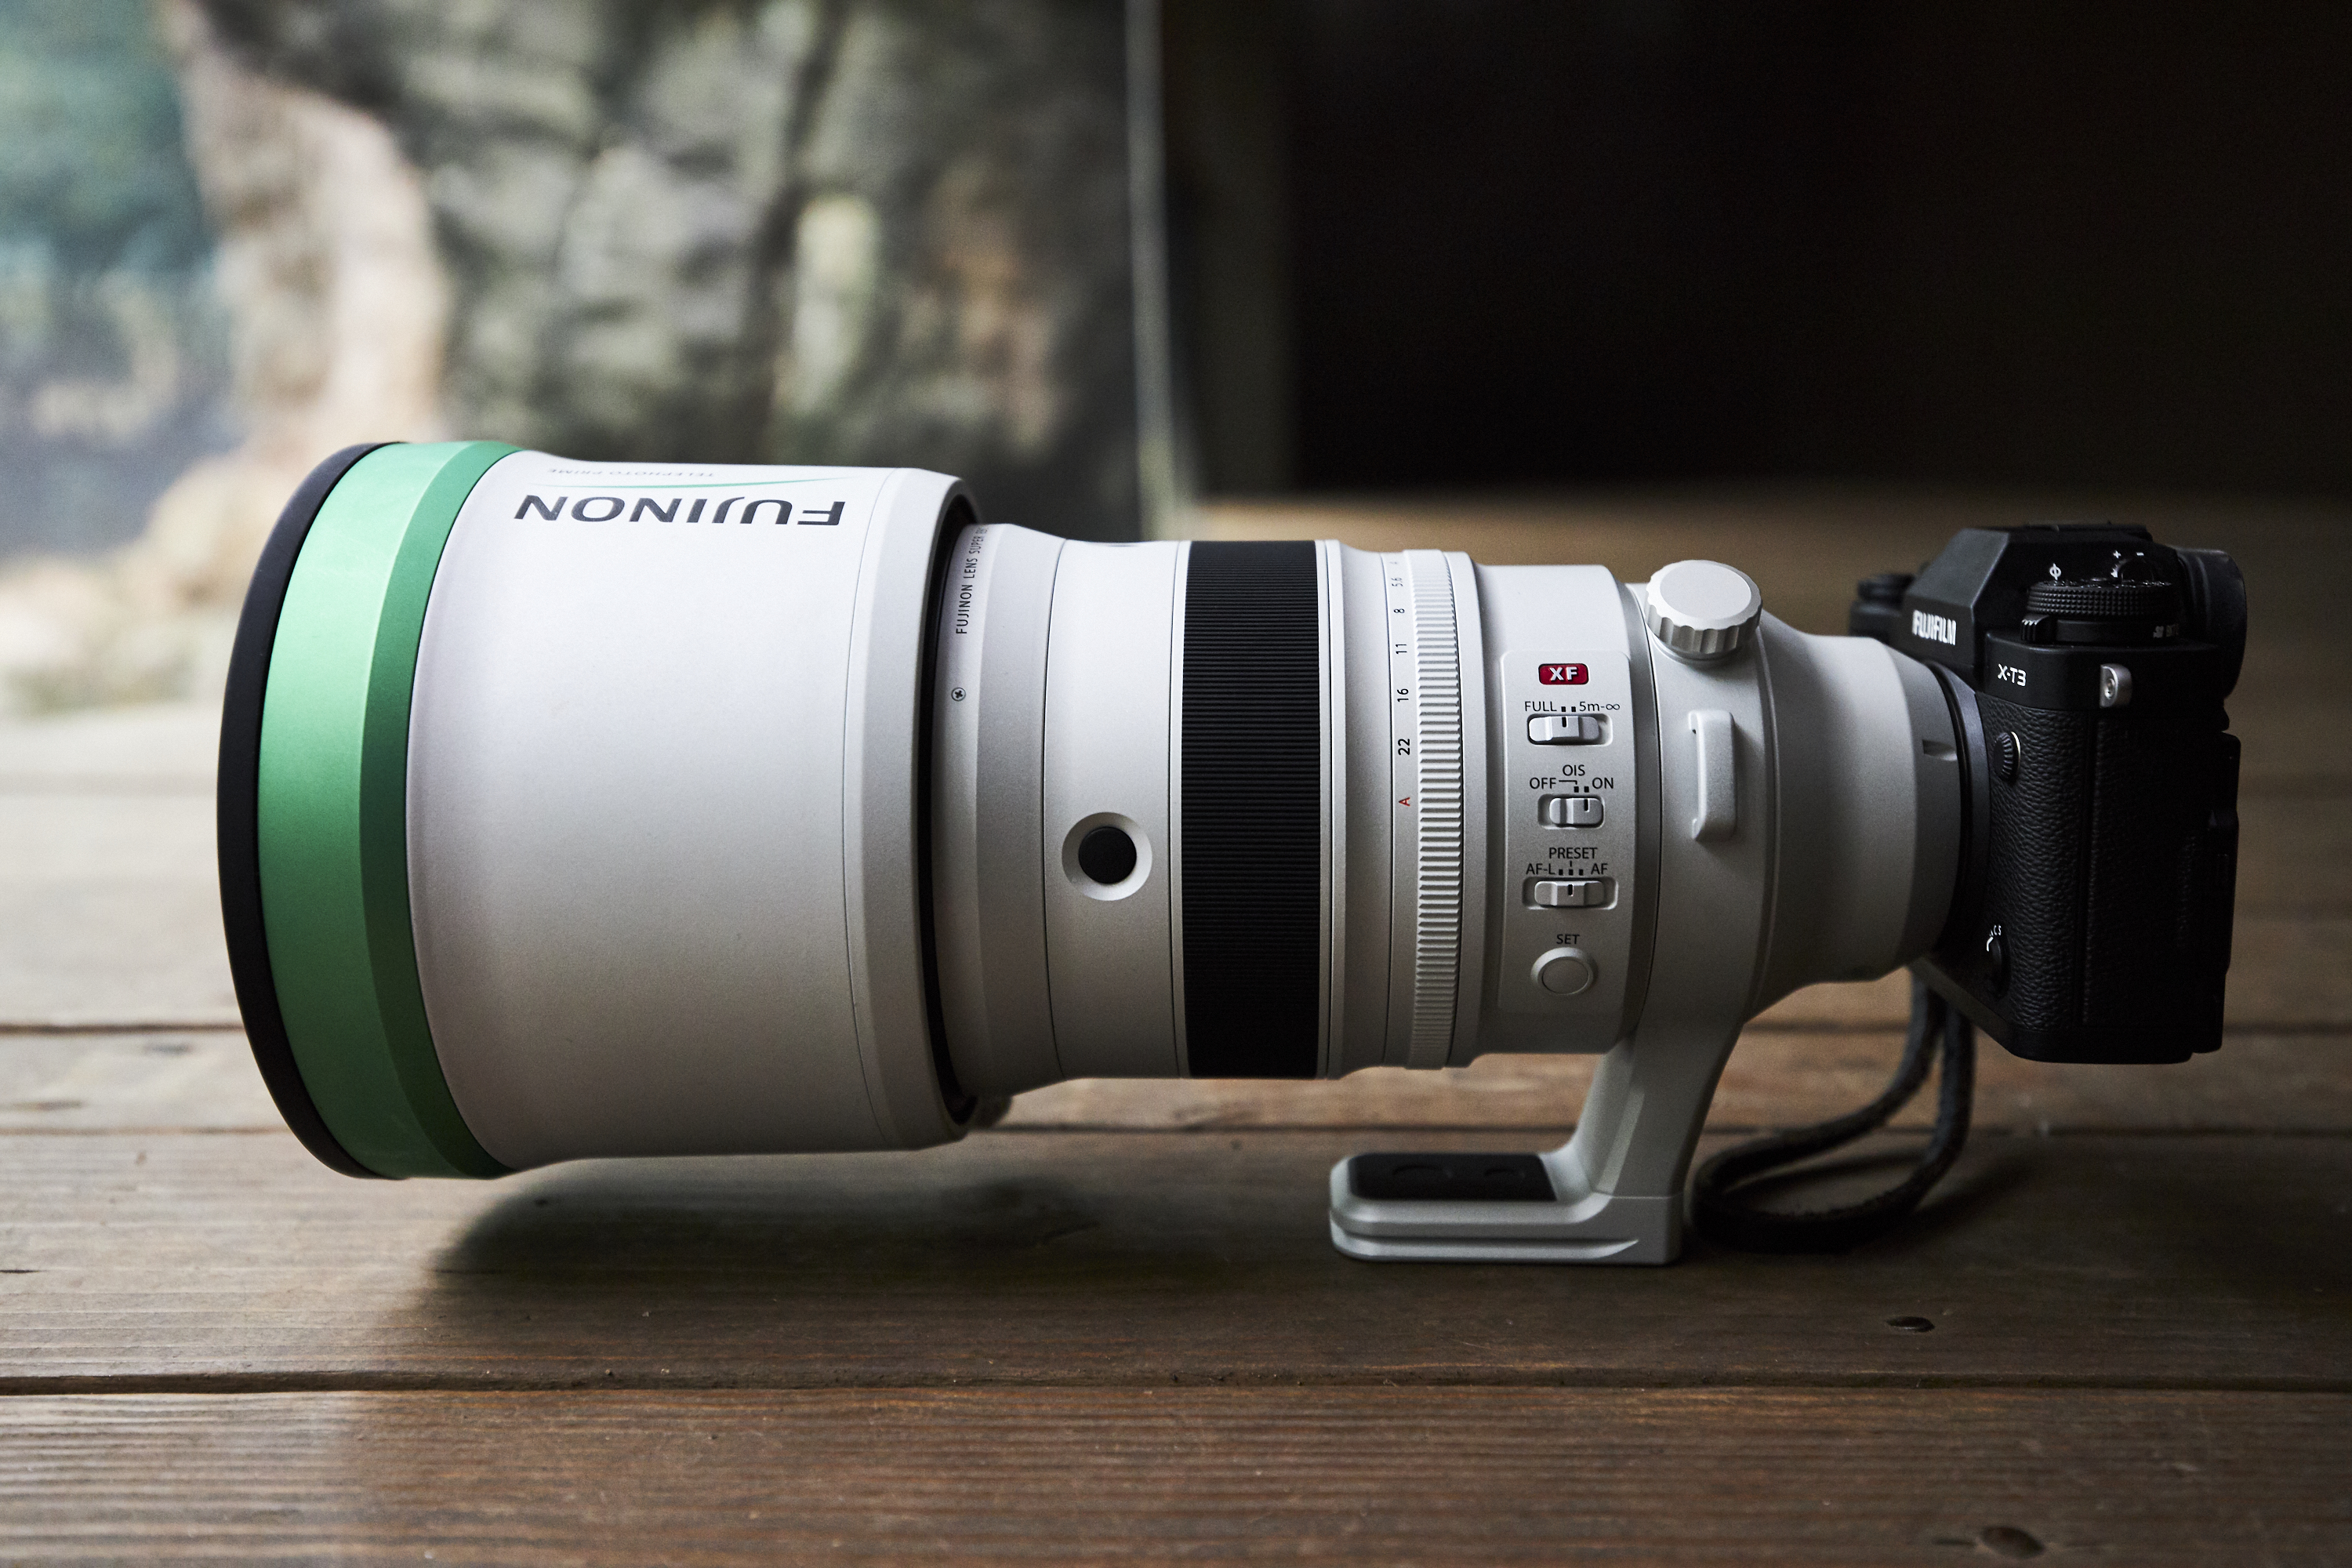 Chris Gampat The Phoblographer Fujifilm 200mm f2 OIS WR review product images f4, ISO 1600, 1-80s,